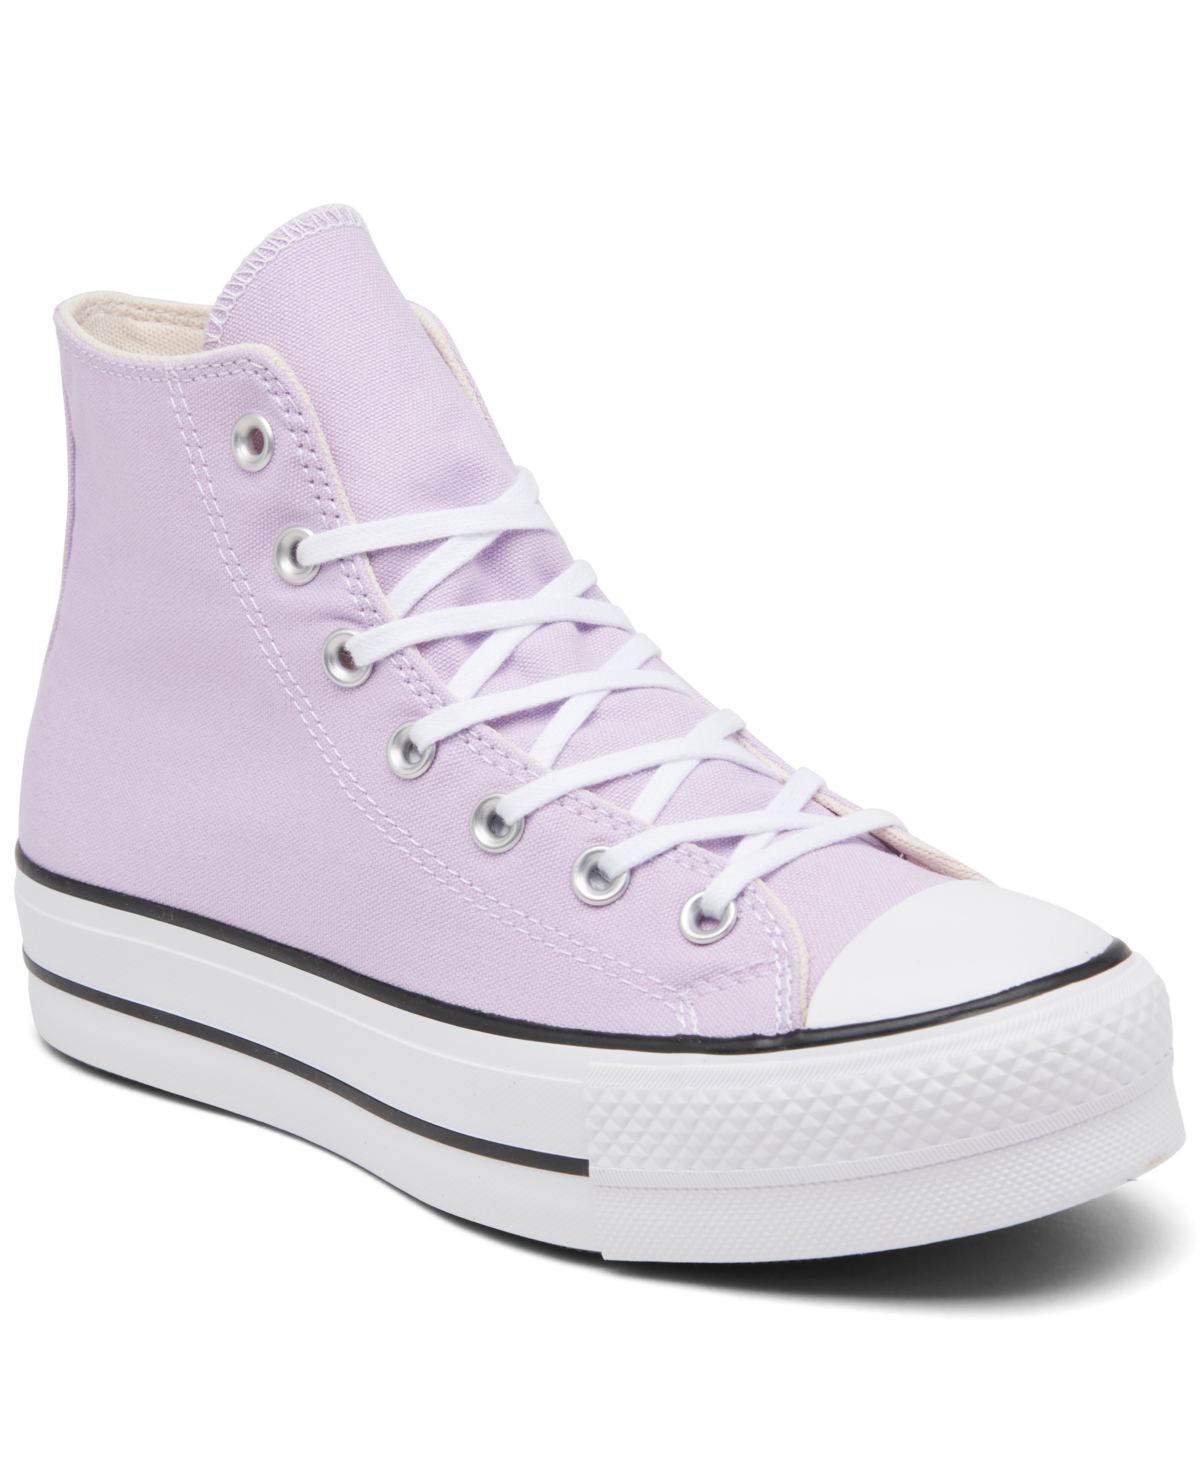 CONVERSE WOMEN'S CHUCK TAYLOR ALL STAR LIFT PLATFORM CASUAL SNEAKERS FROM FINISH LINE